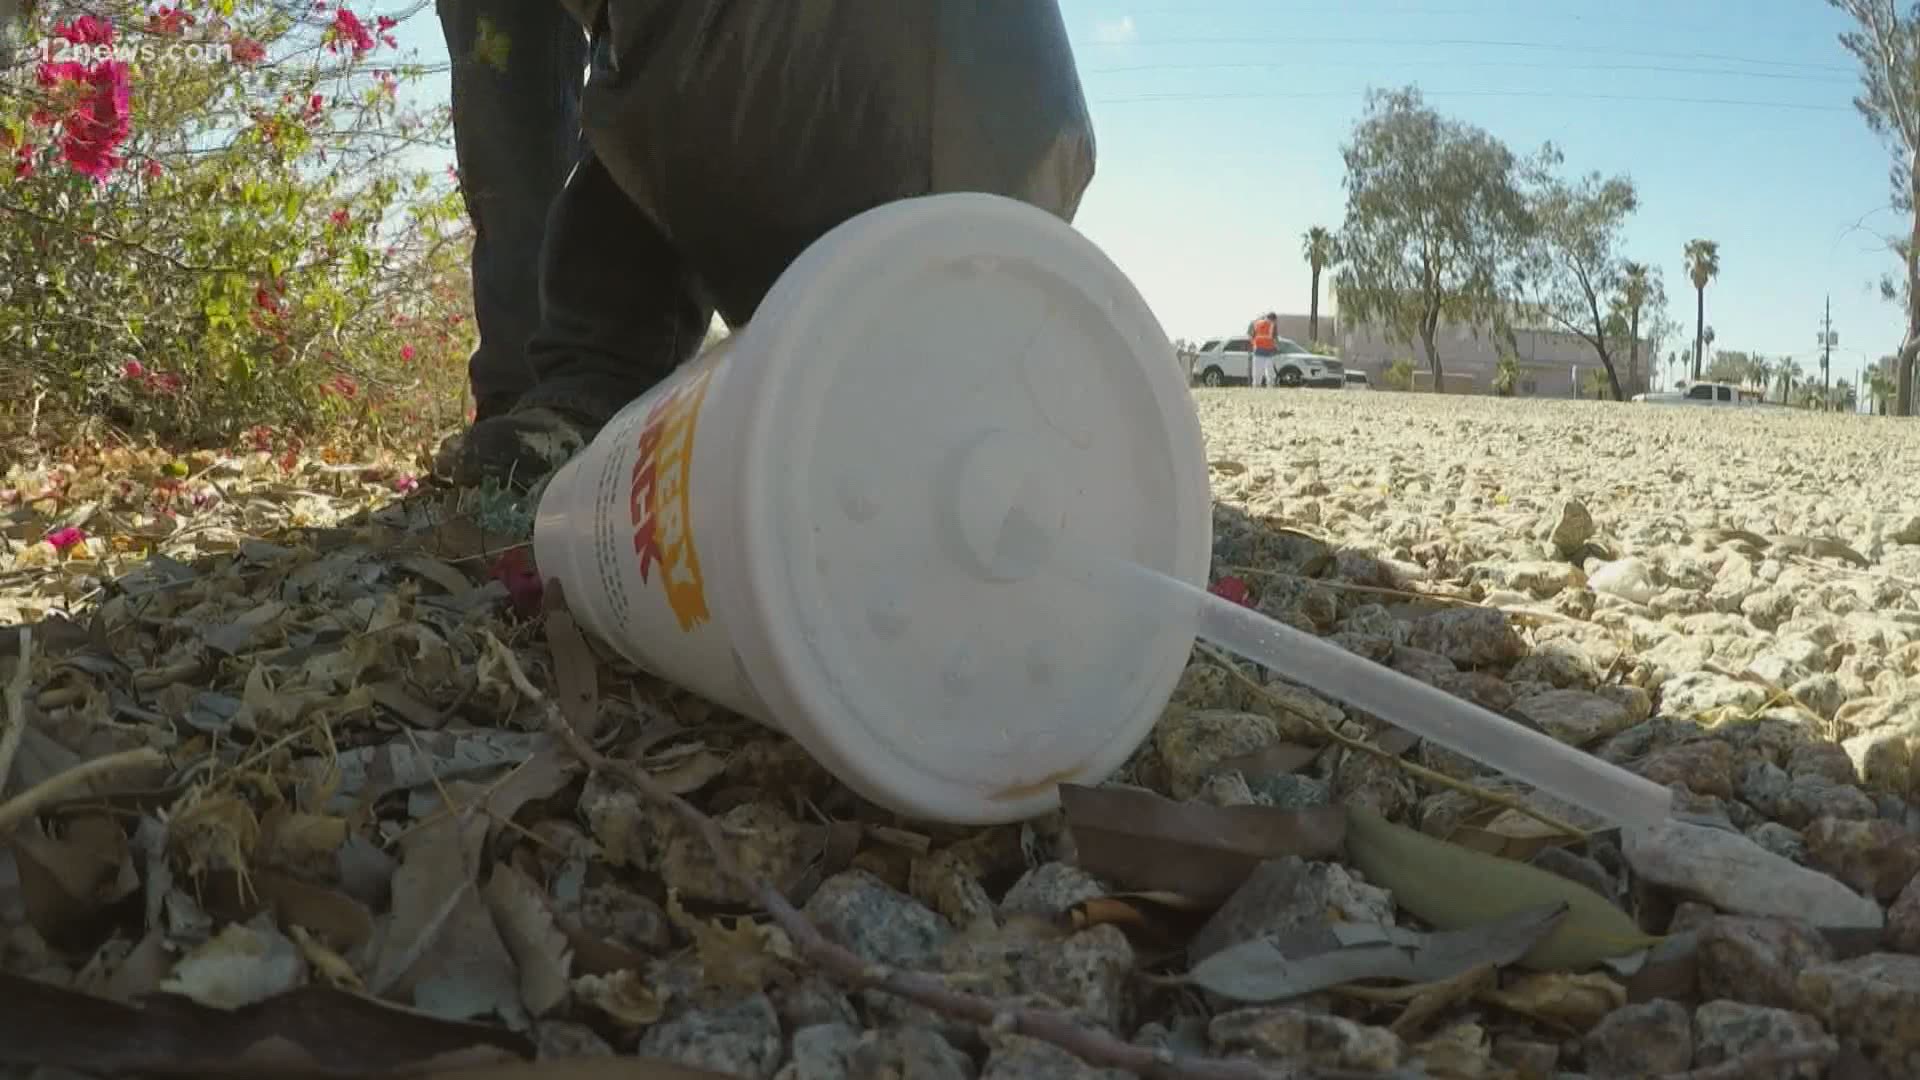 ADOT has seen a huge increase in the amount of litter on the sides of roadways statewide since the beginning of the pandemic.